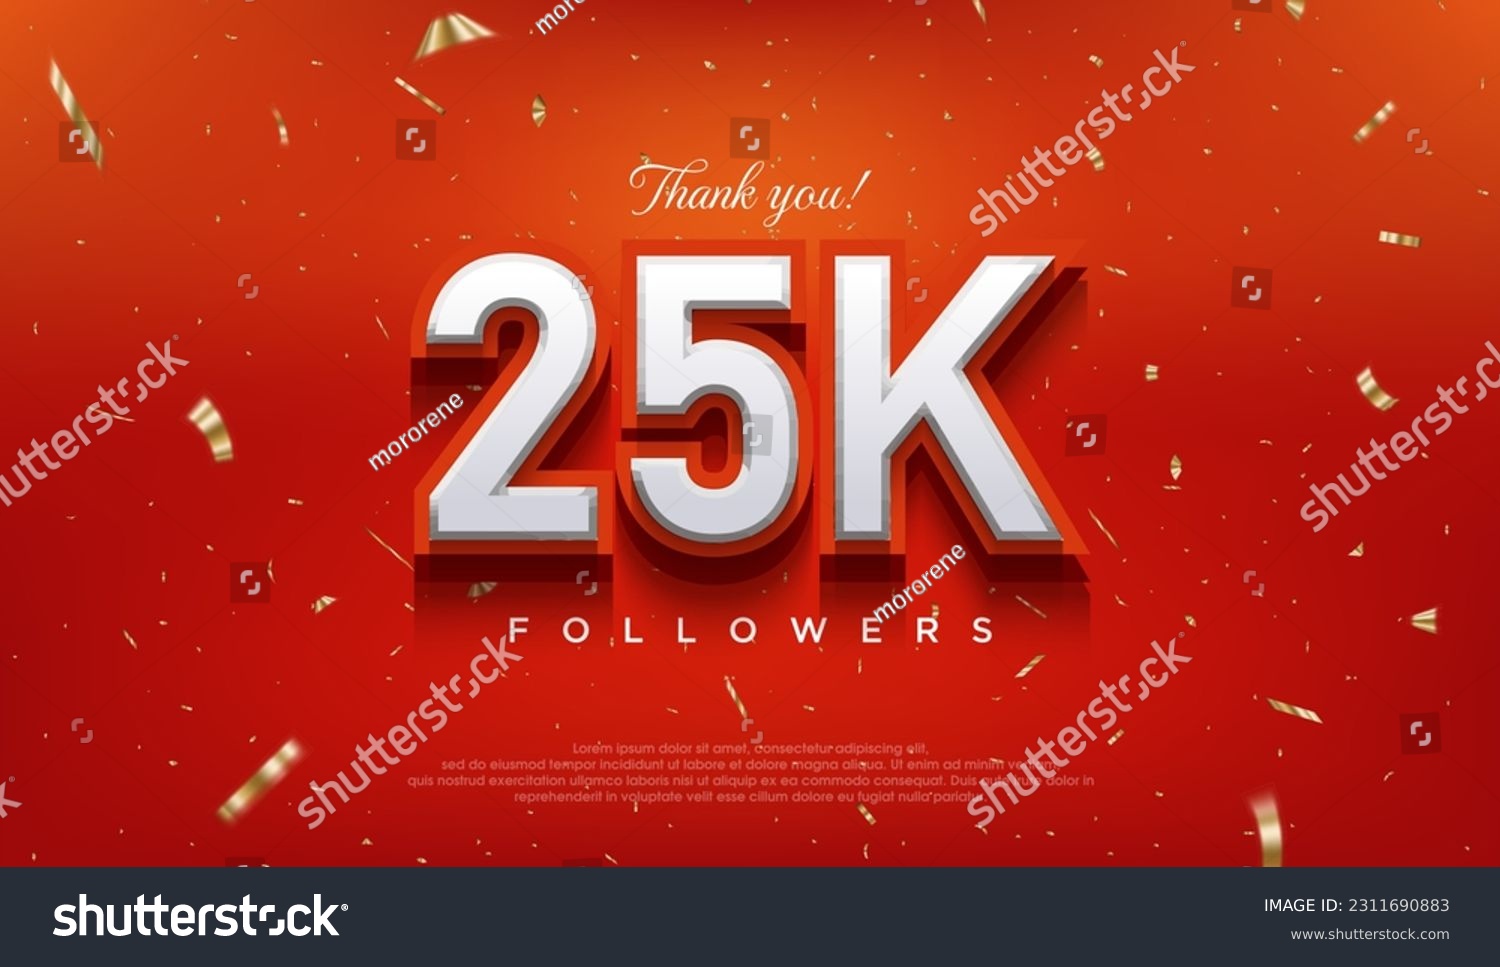 SVG of Elegant number to thank 25k followers, the latest premium vector design. svg